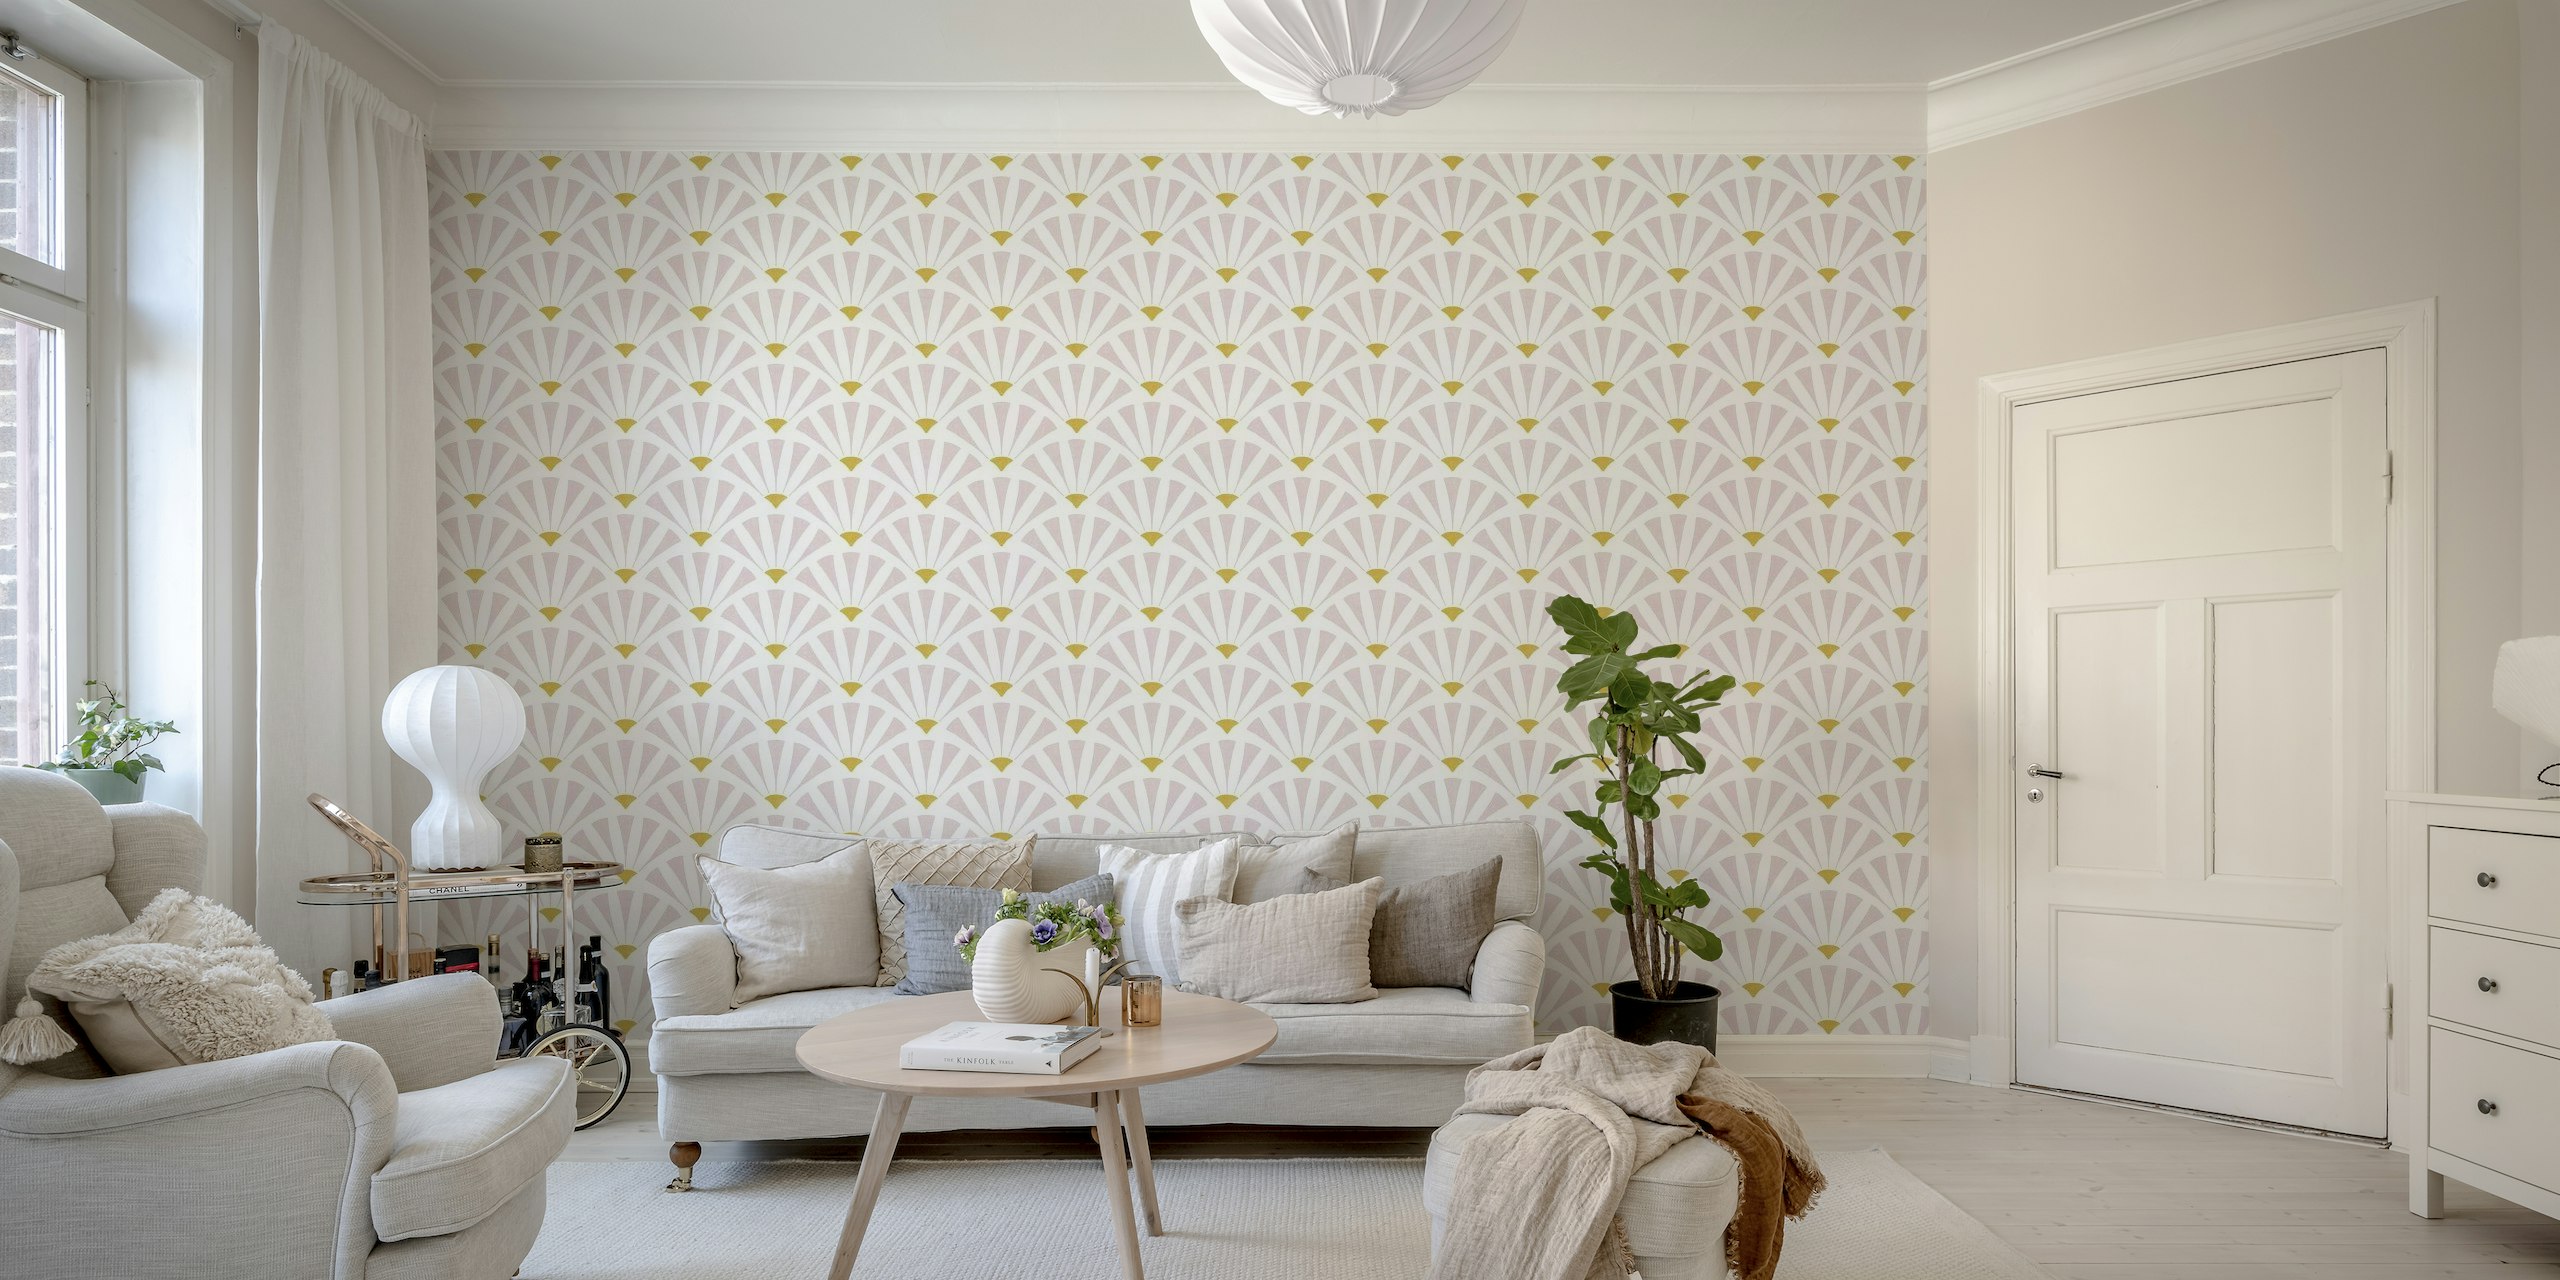 Myrtle pink wall mural with fan-shaped patterns